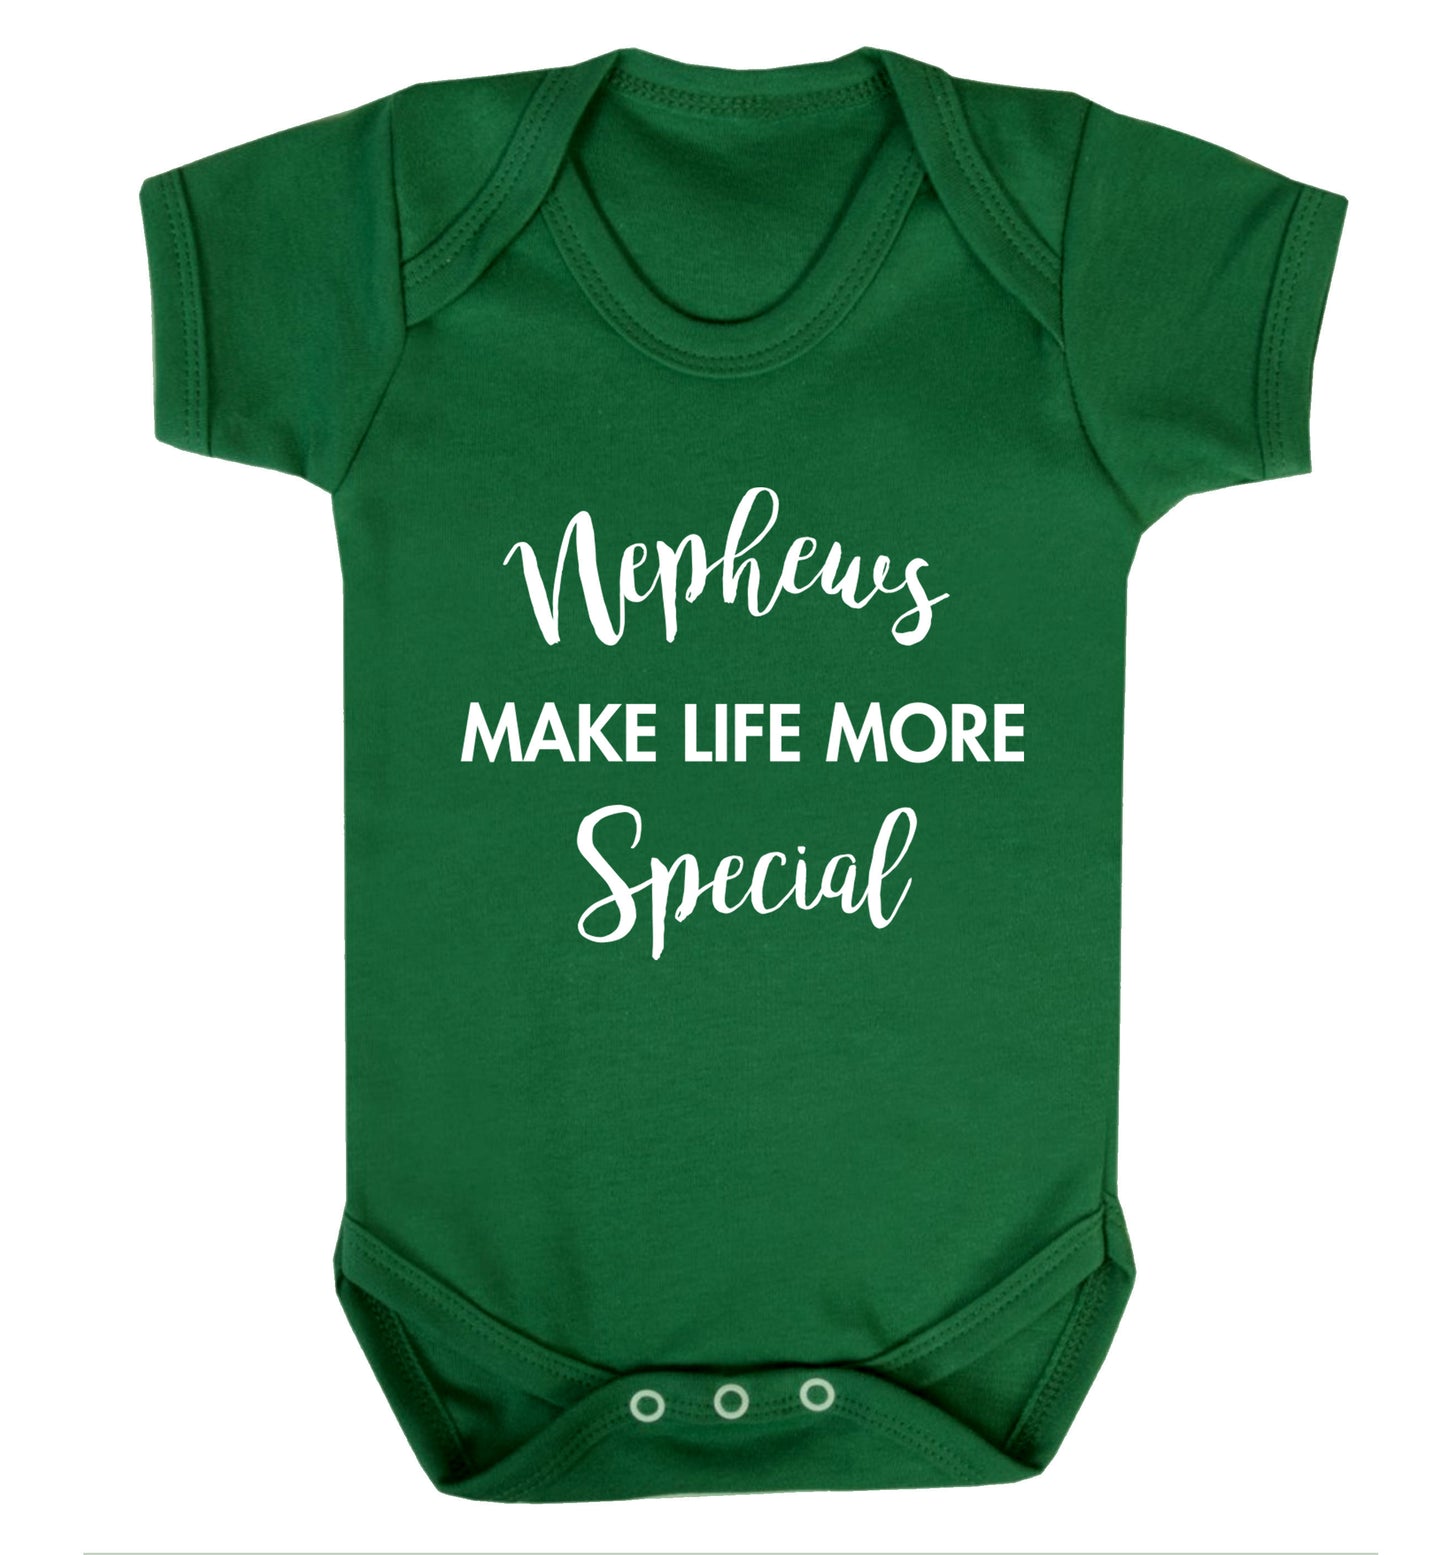 Nephews make life more special Baby Vest green 18-24 months